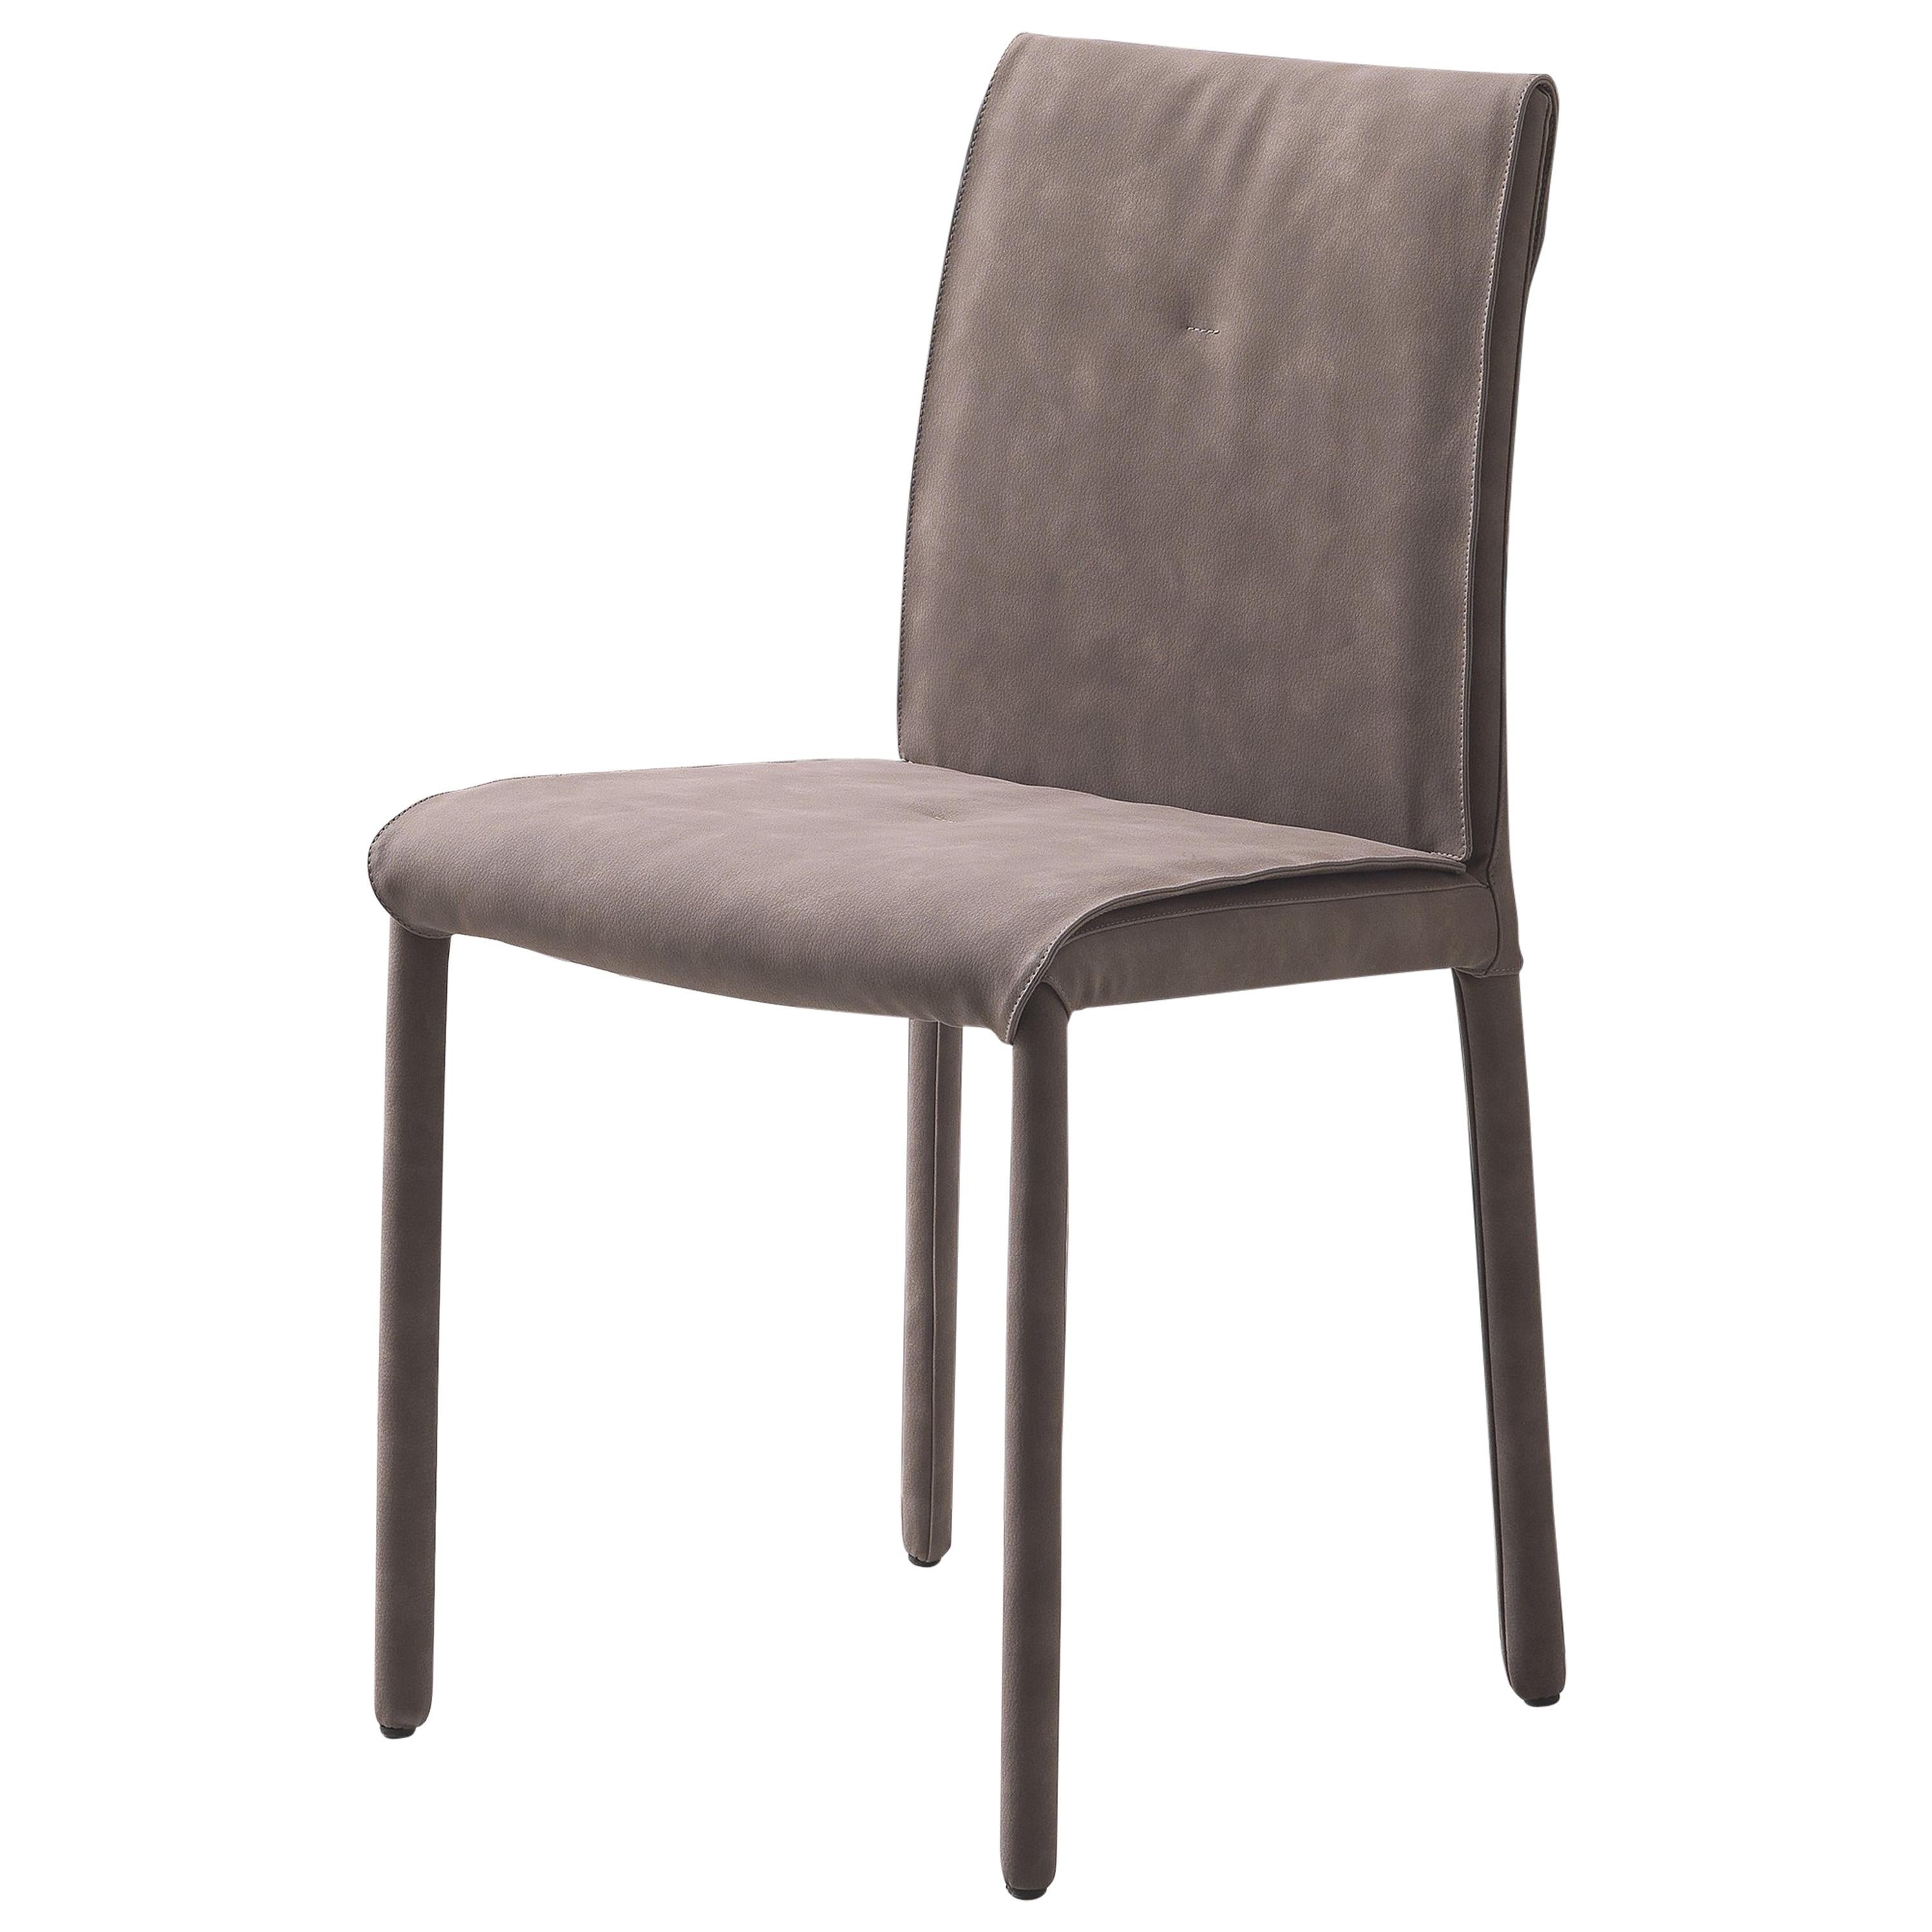 Pacini & Cappellini Bea Chair in Brown Leather by Studio Tecnico Pacini & Cappel For Sale